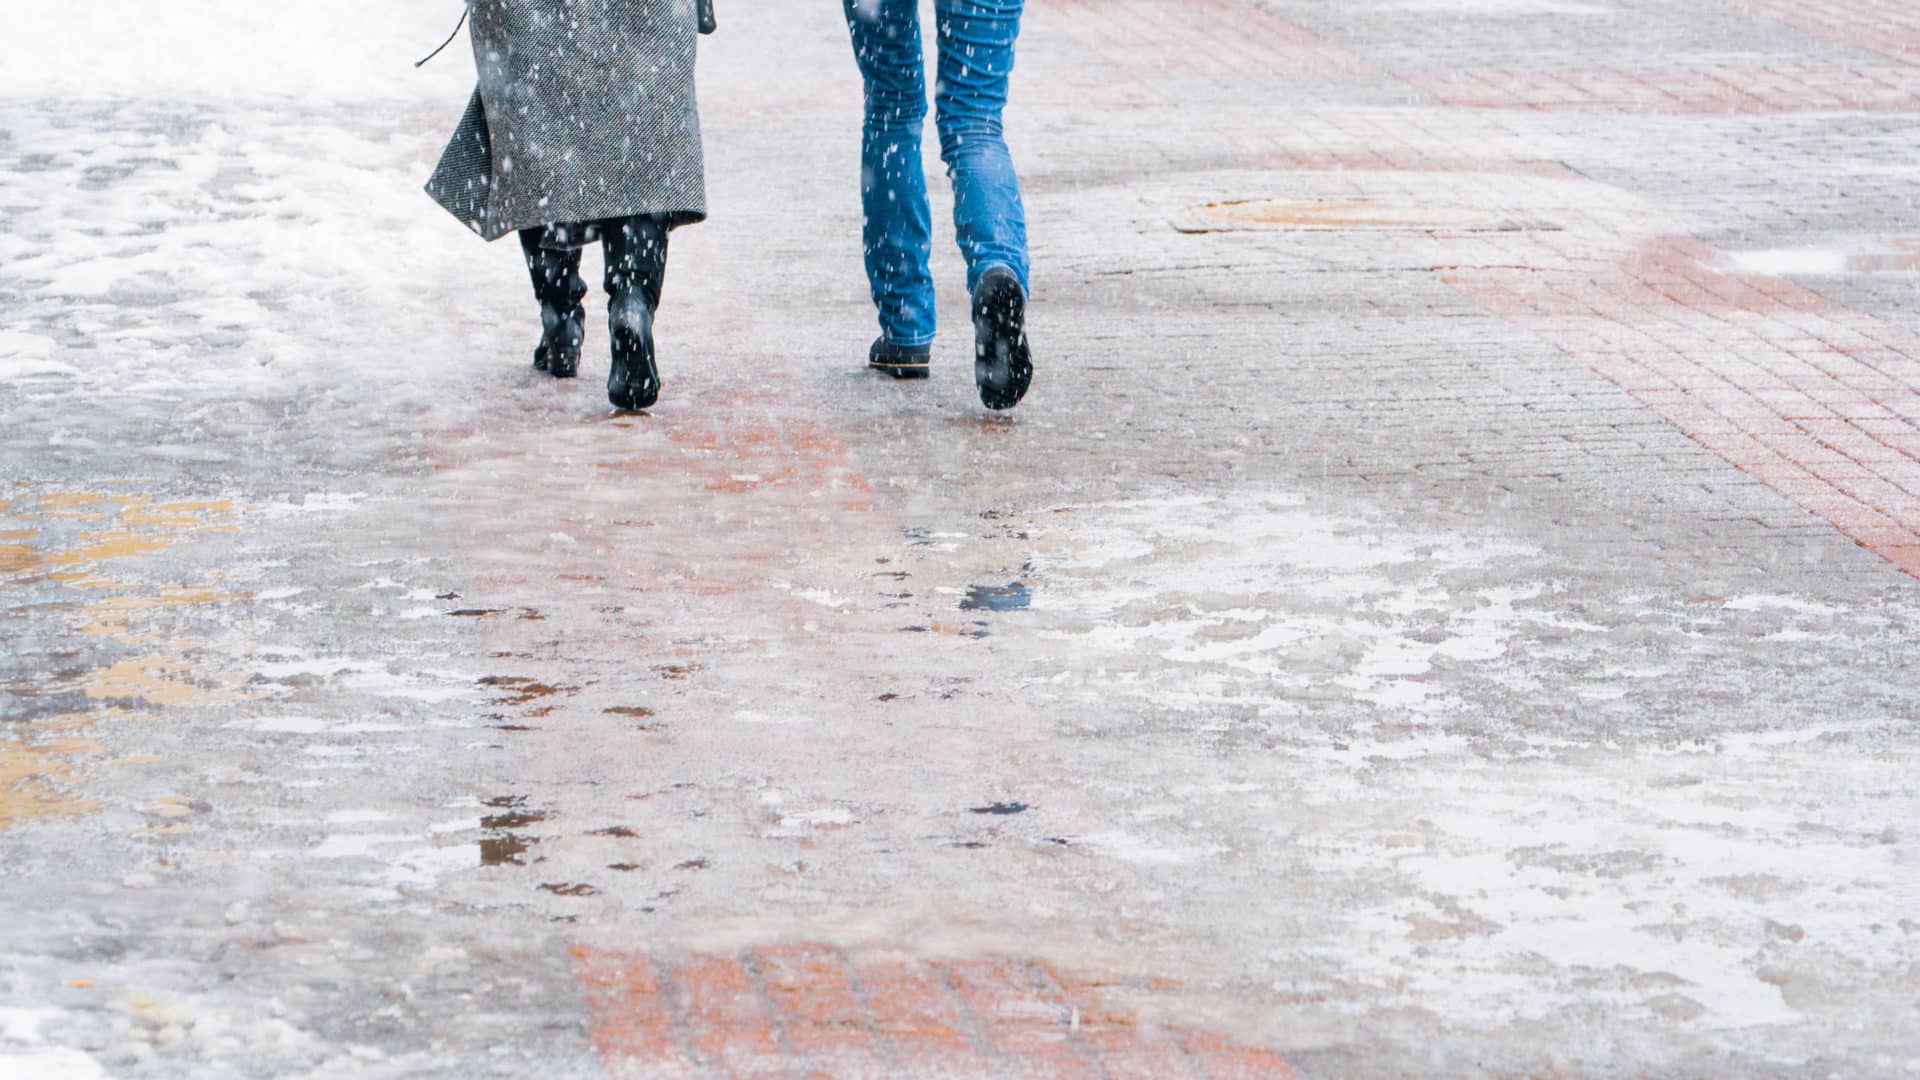 Sleet in the City Means Your Sidewalk Fall Could Be NYC's Fault